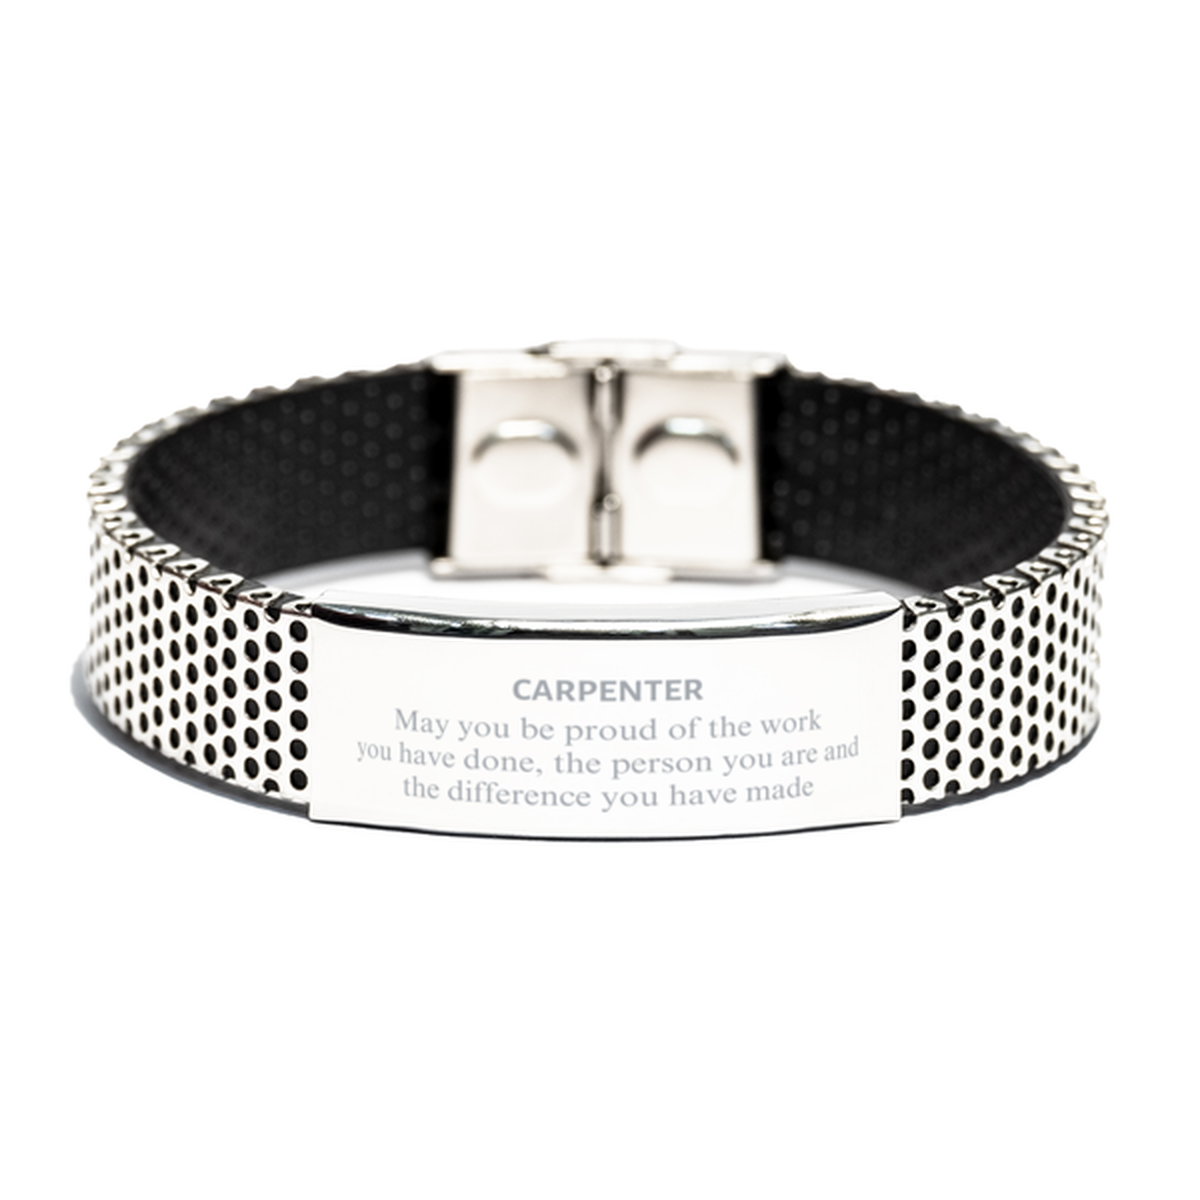 Carpenter May you be proud of the work you have done, Retirement Carpenter Stainless Steel Bracelet for Colleague Appreciation Gifts Amazing for Carpenter